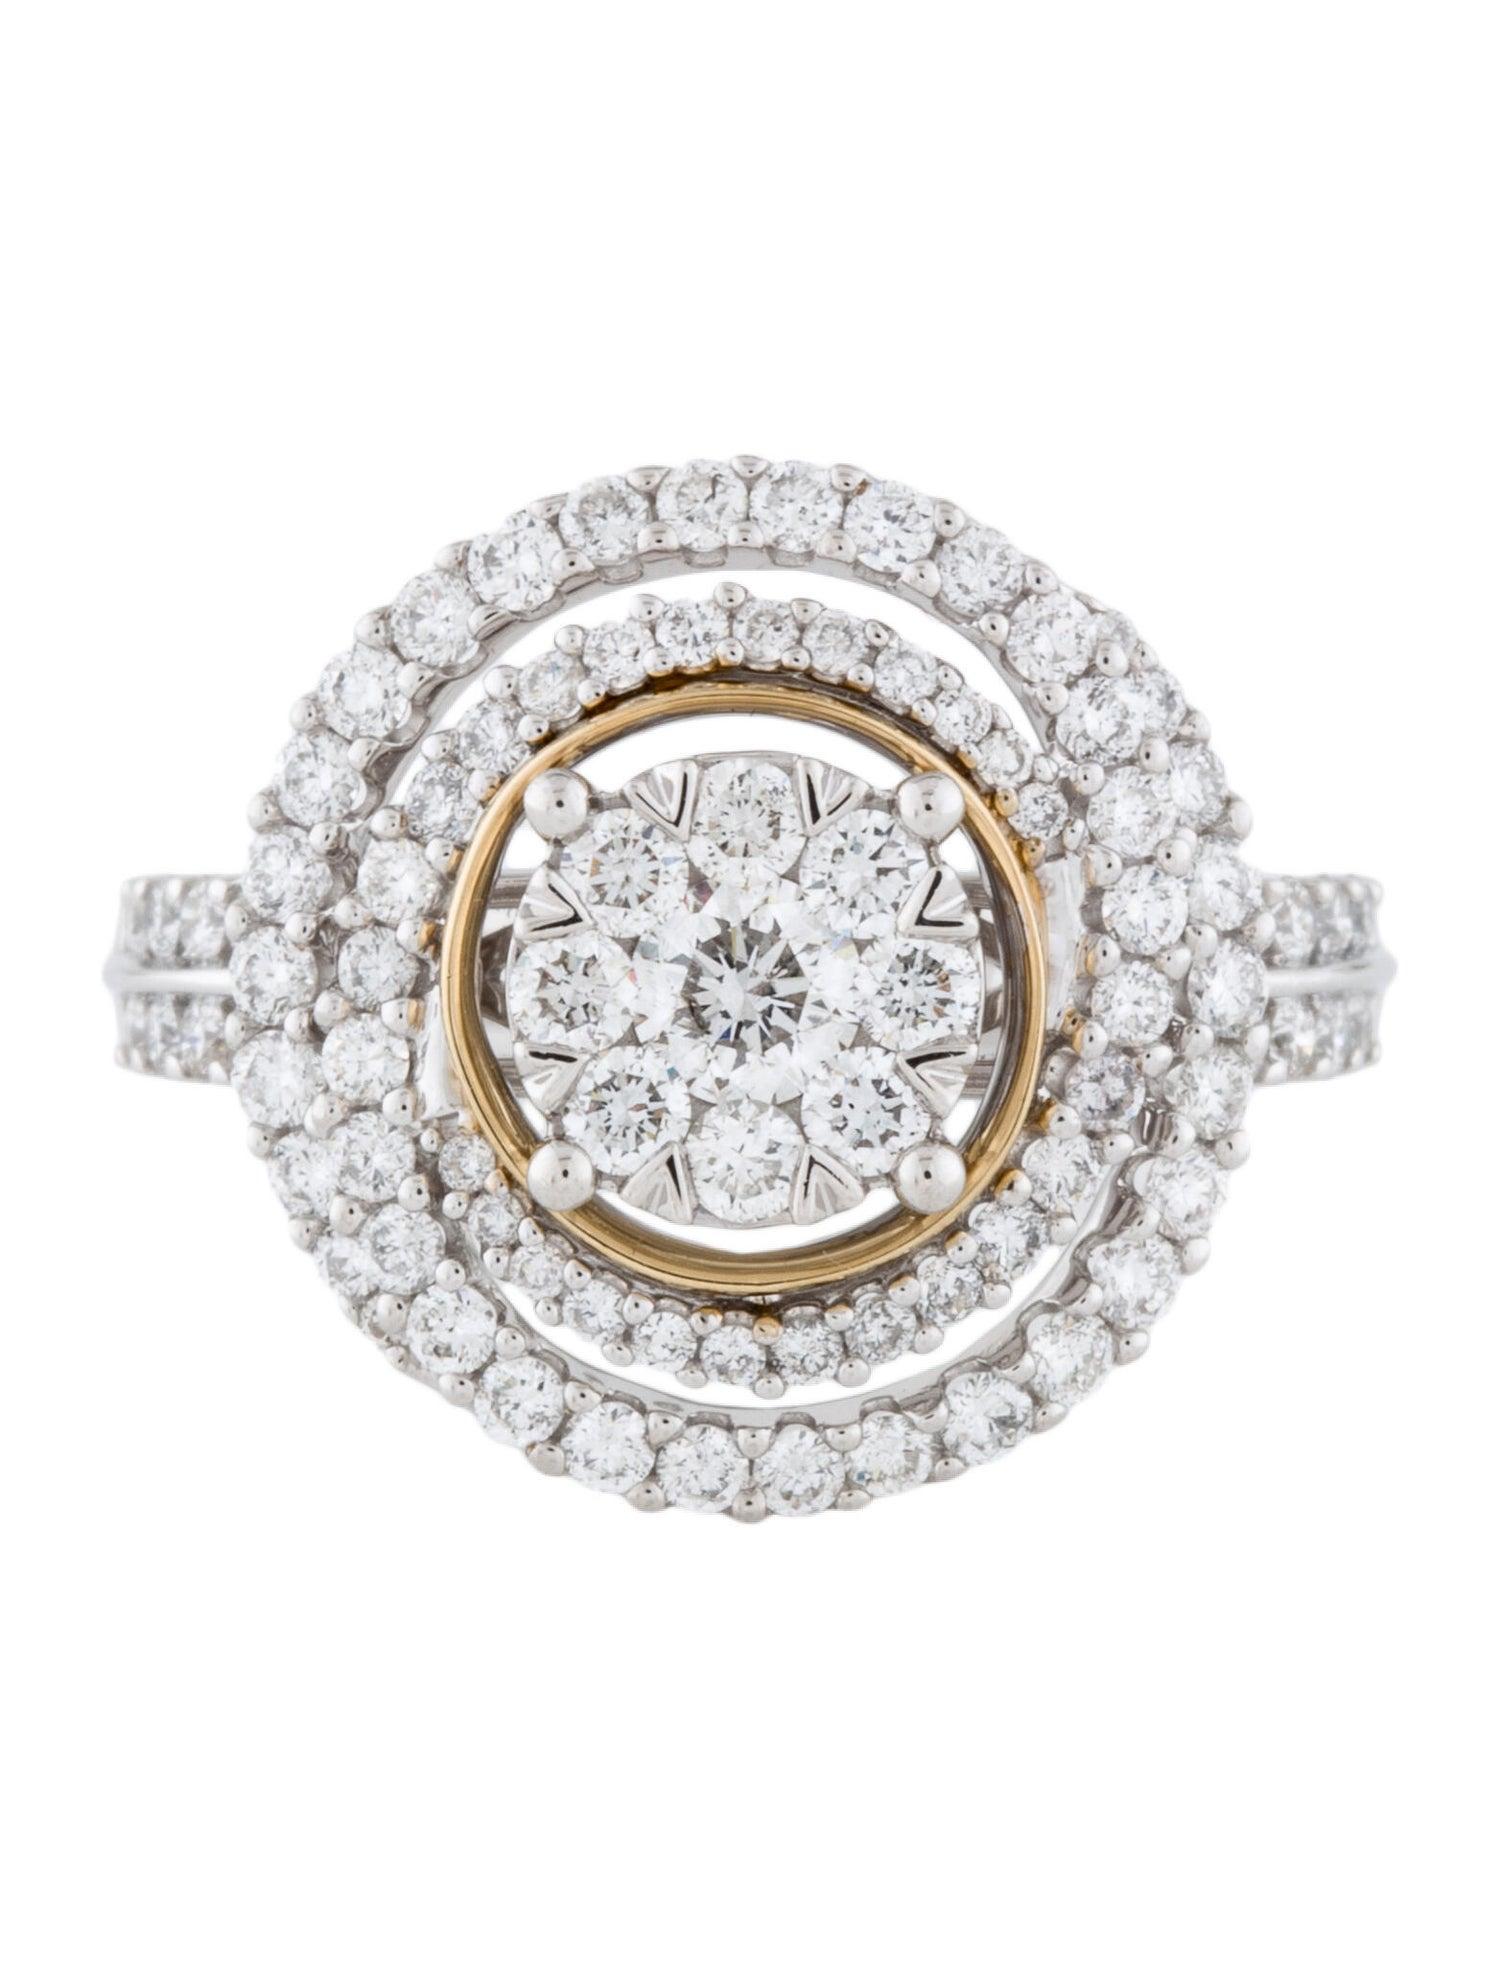 A beautiful 14kt white and yellow gold diamond cluster ring featuring 1.25 Carats of Round Brilliant Diamonds. There are 93 round brilliant cut diamonds set in this cluster ring. Nine diamonds in the center are pressure set and the remaining